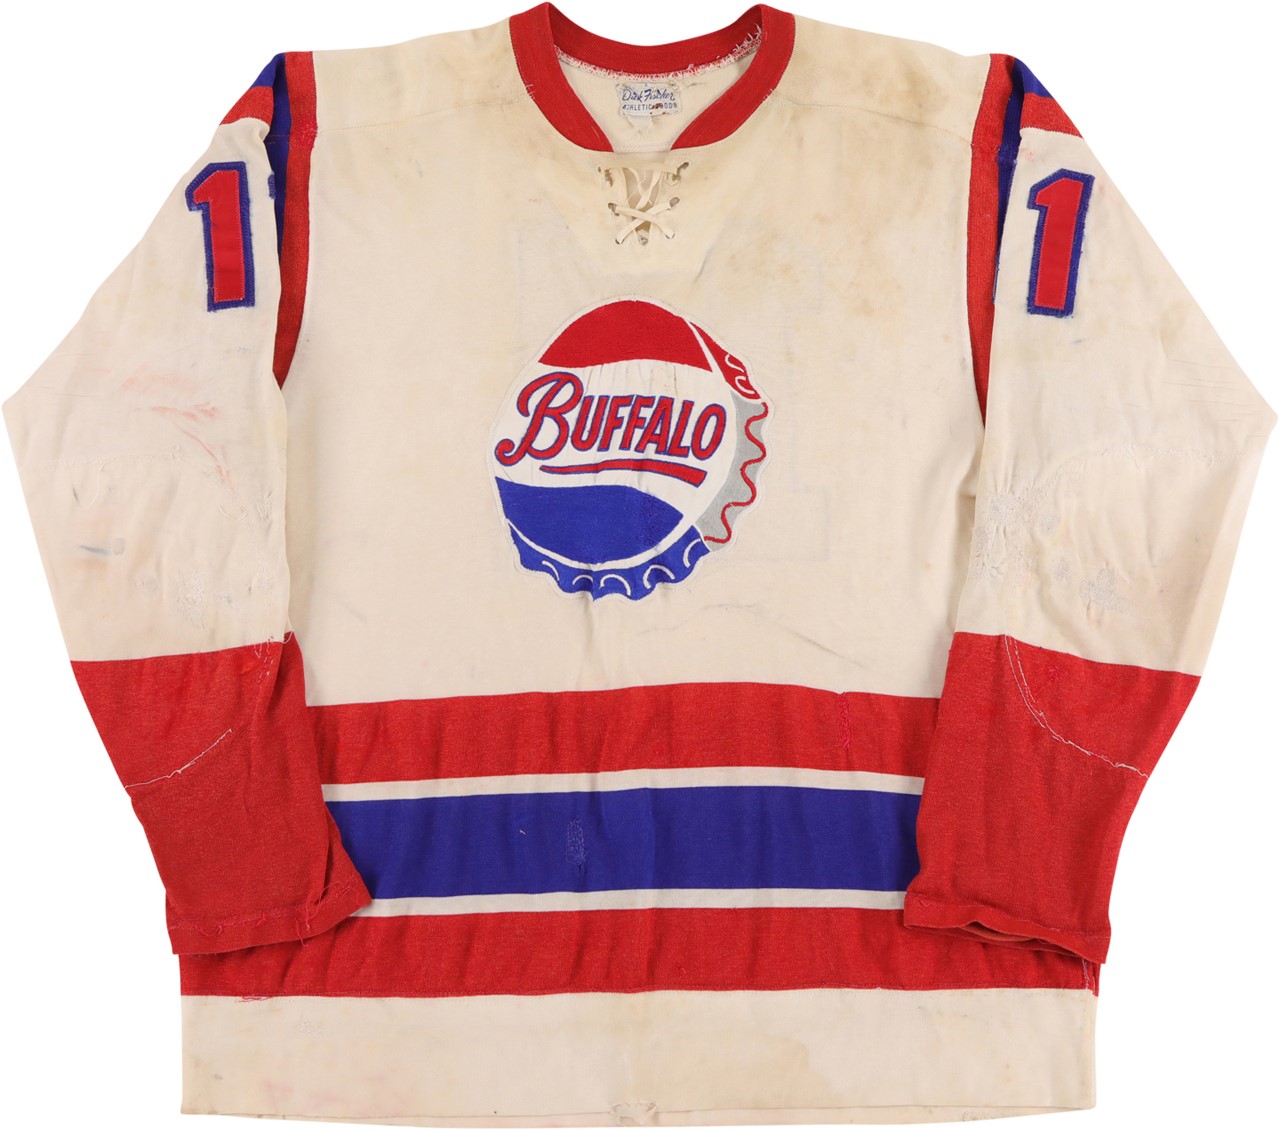 - 1960s Buffalo Bisons "Pepsi" Game Worn Jersey - Gil Perreault's Number 11!